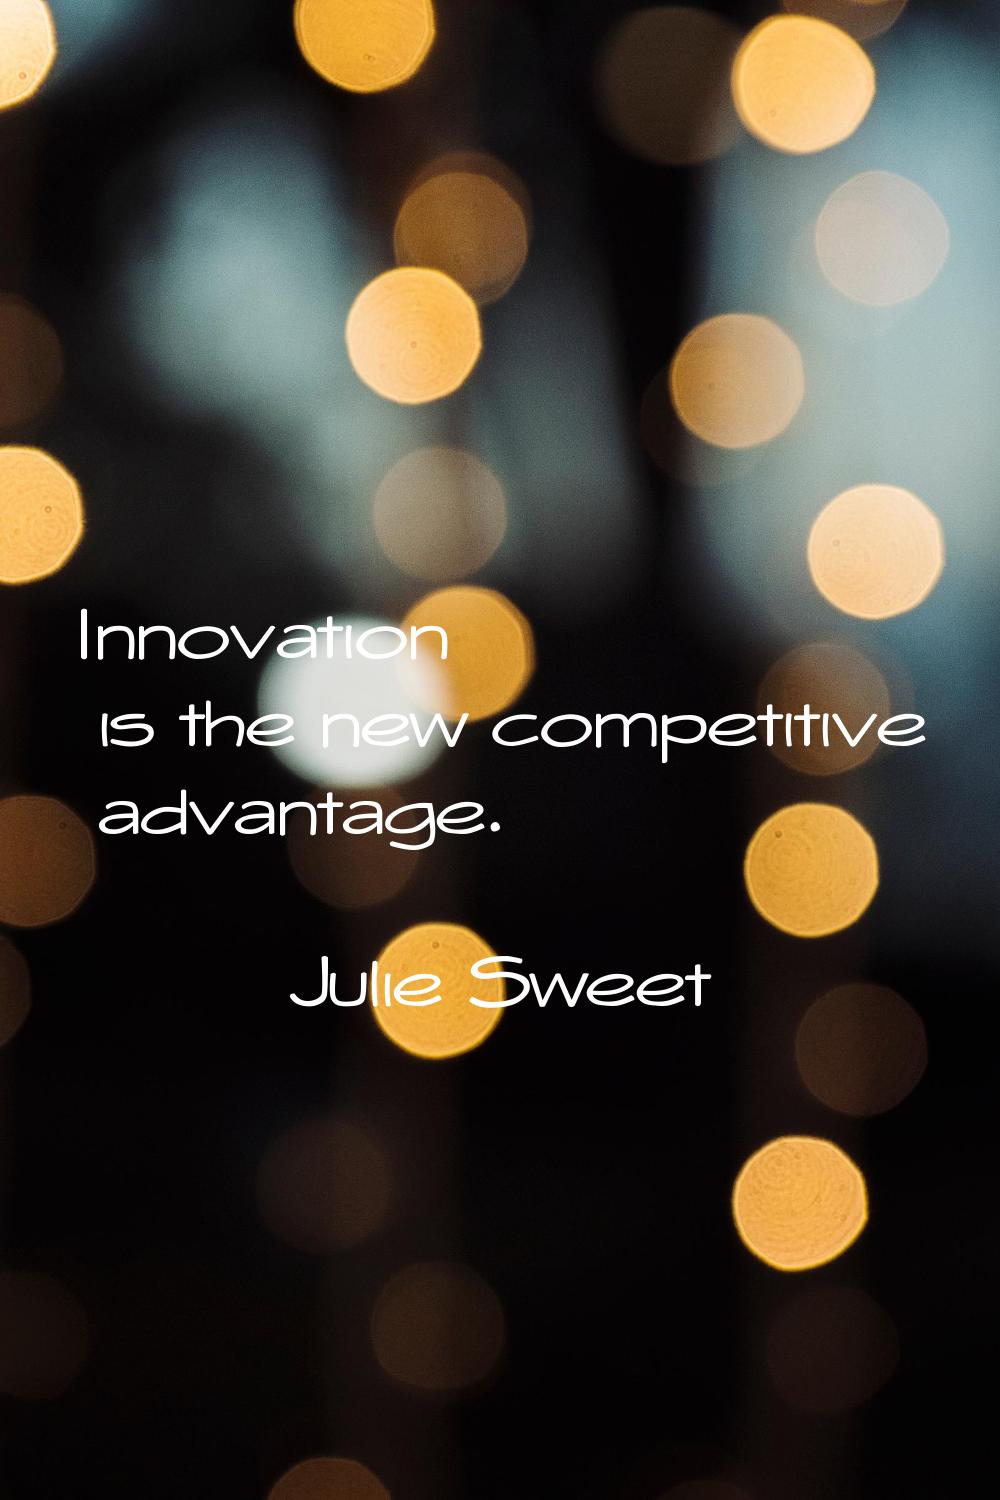 Innovation is the new competitive advantage.